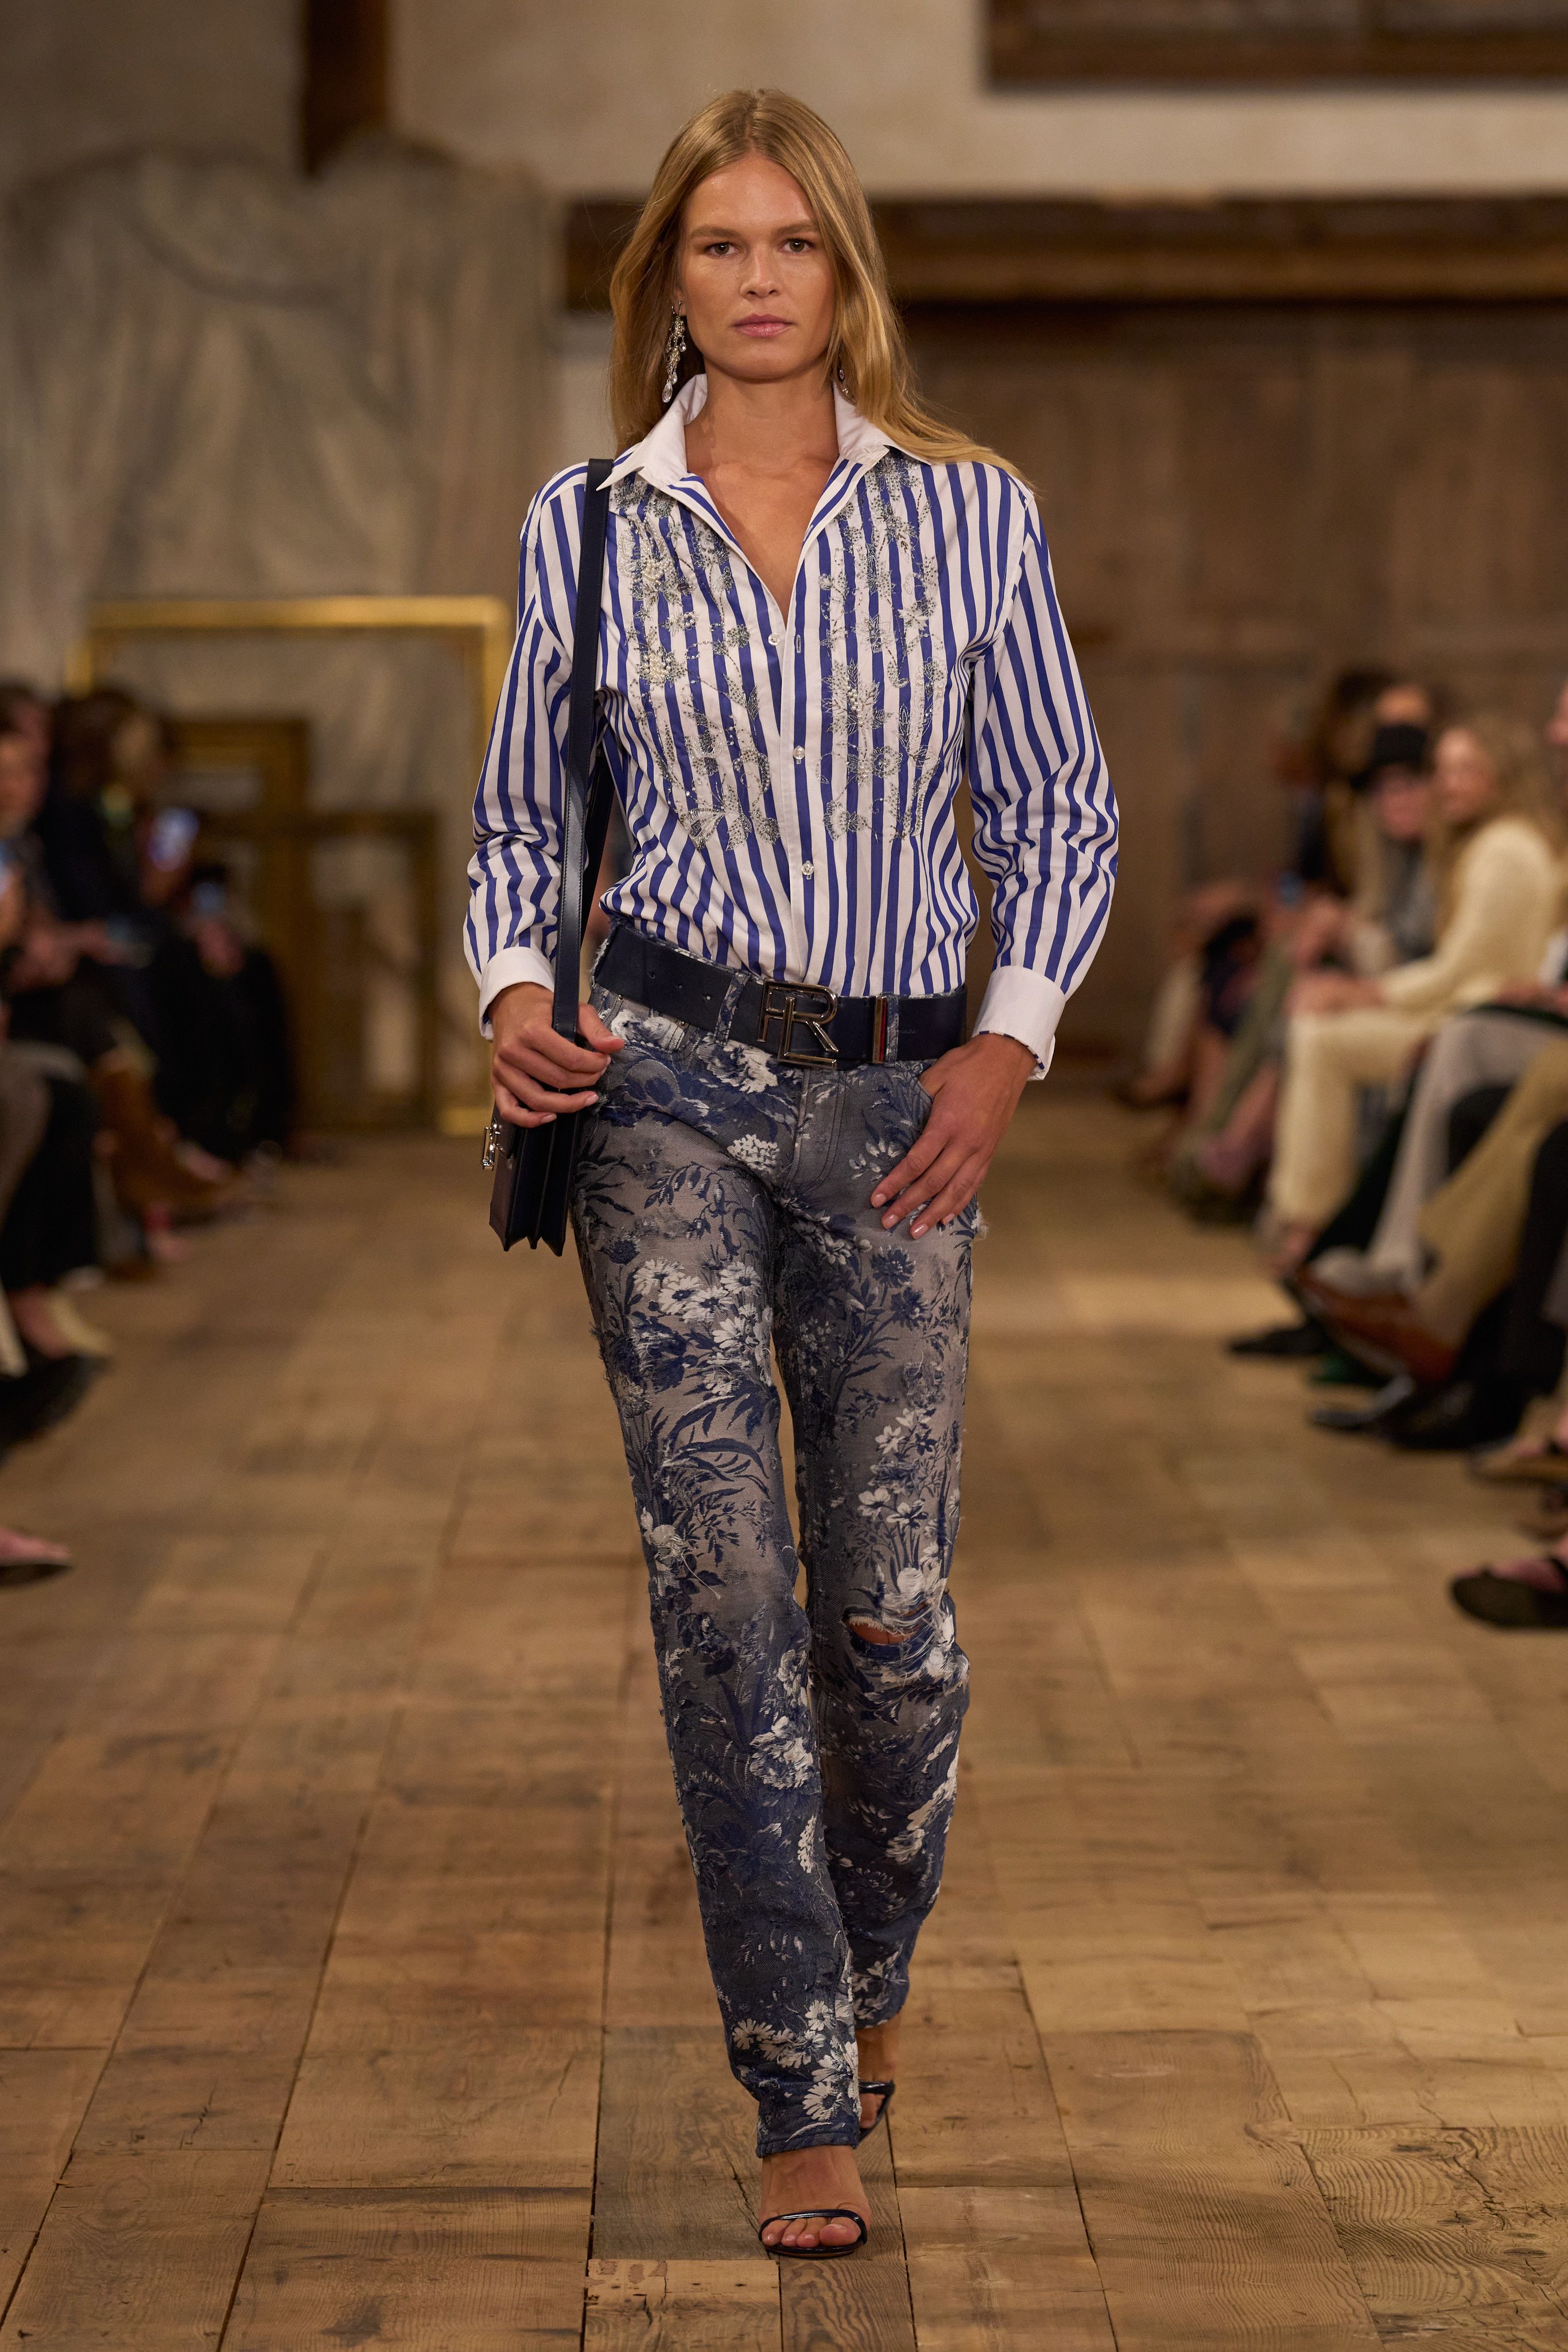 Ralph Lauren Ready To Wear Fashion Show, Collection Fall Winter 2022  presented during New York Fashion Week, Runway look #008 – NOWFASHION